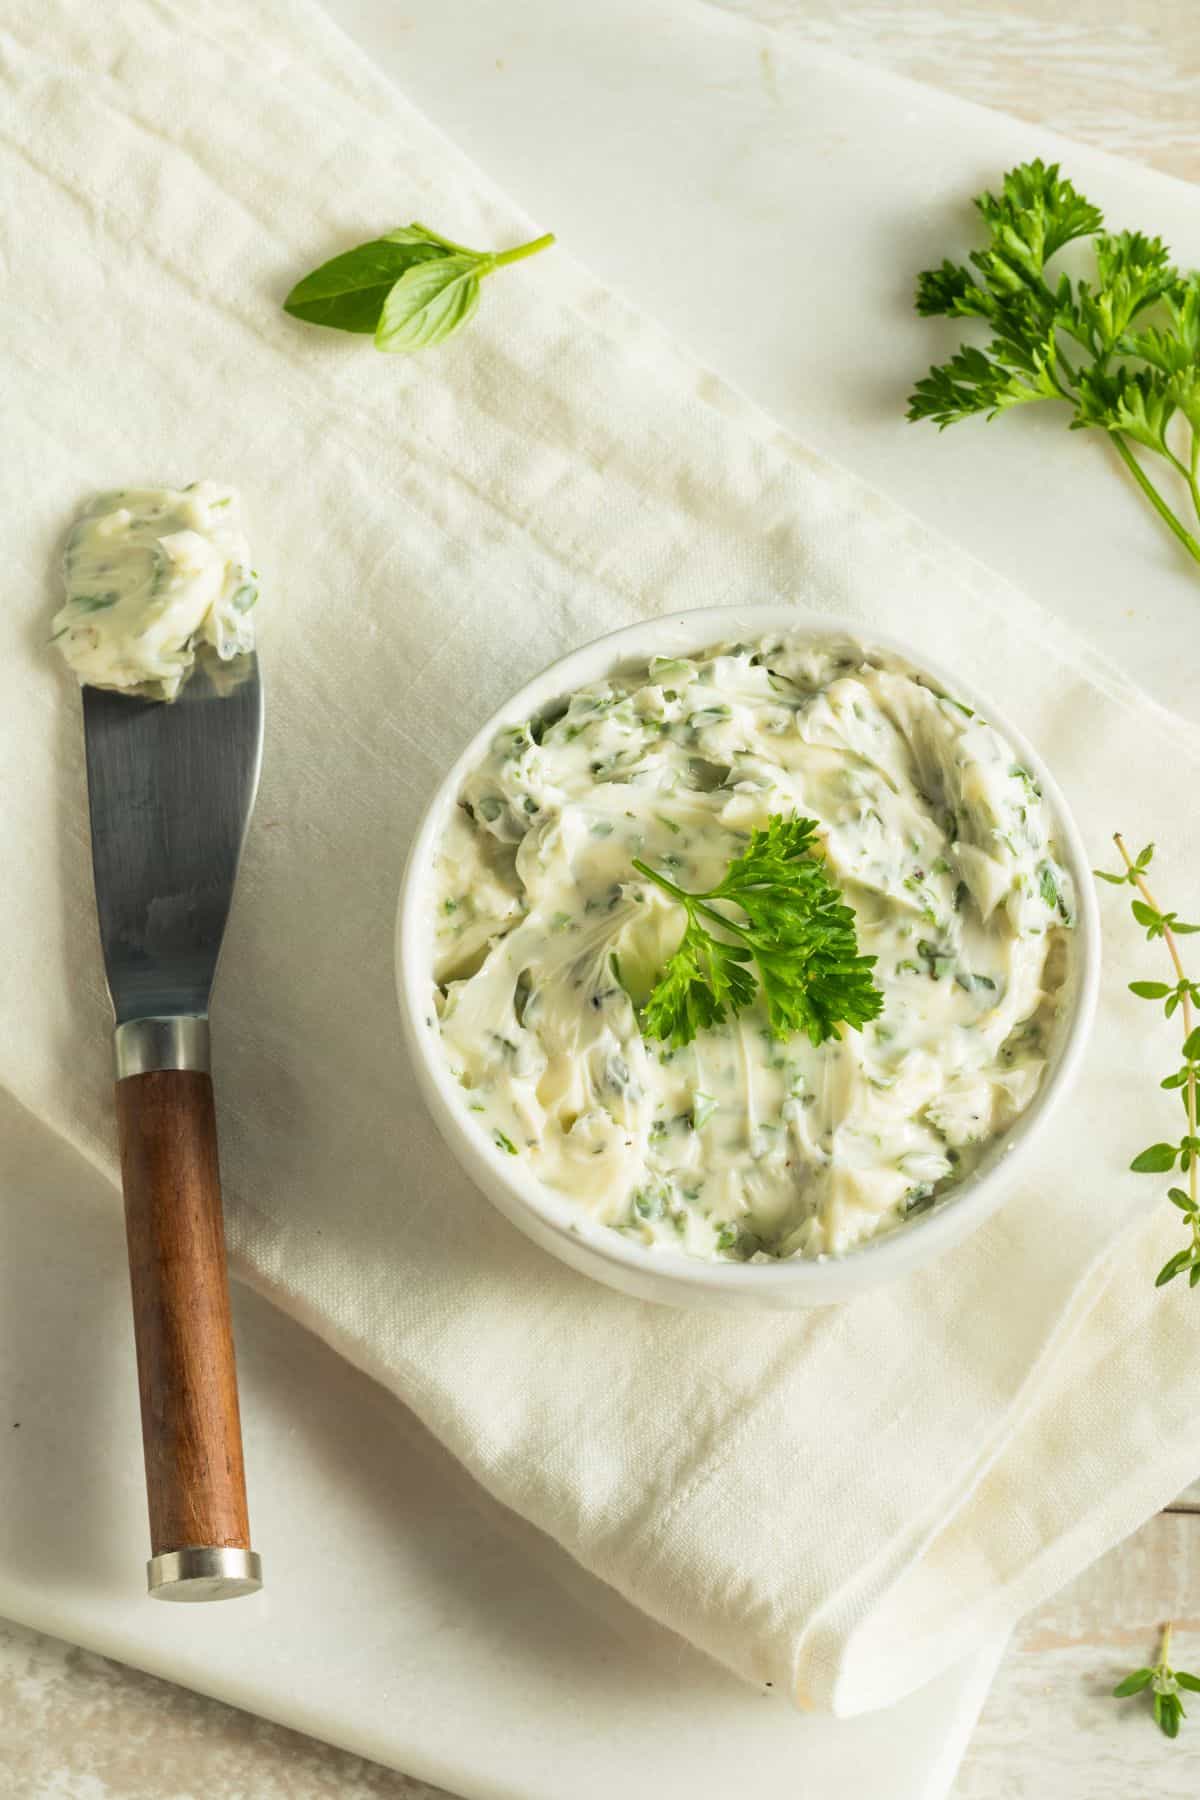 Butter mixed with parsley in a bowl.